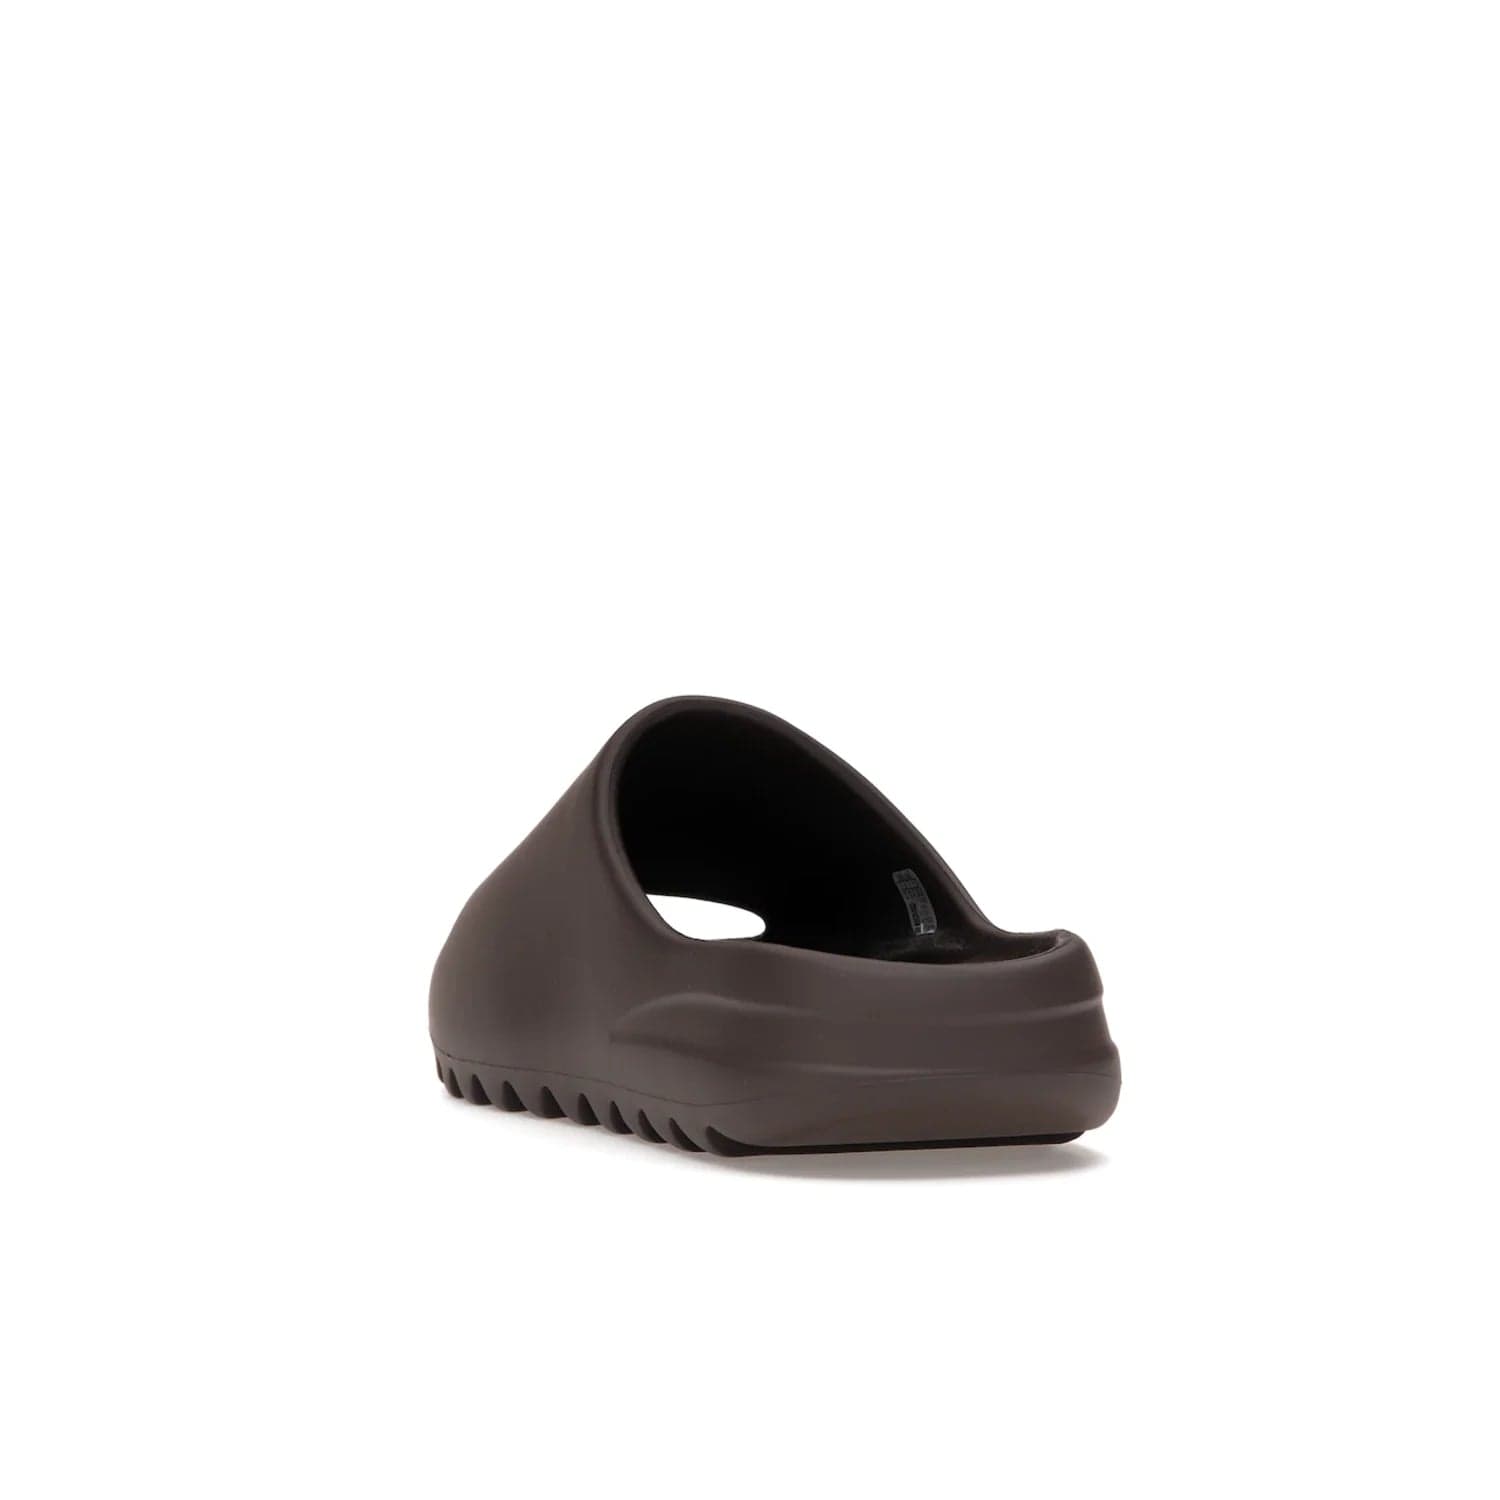 adidas Yeezy Slide Soot - Image 26 - Only at www.BallersClubKickz.com - Shop the Yeezy Slide Soot sneaker by Adidas, a sleek blend of form and function. Monochrome silhouette in Soot/Soot/Soot. Lightweight EVA foam offers comfort and durability. Get the must-have style today.